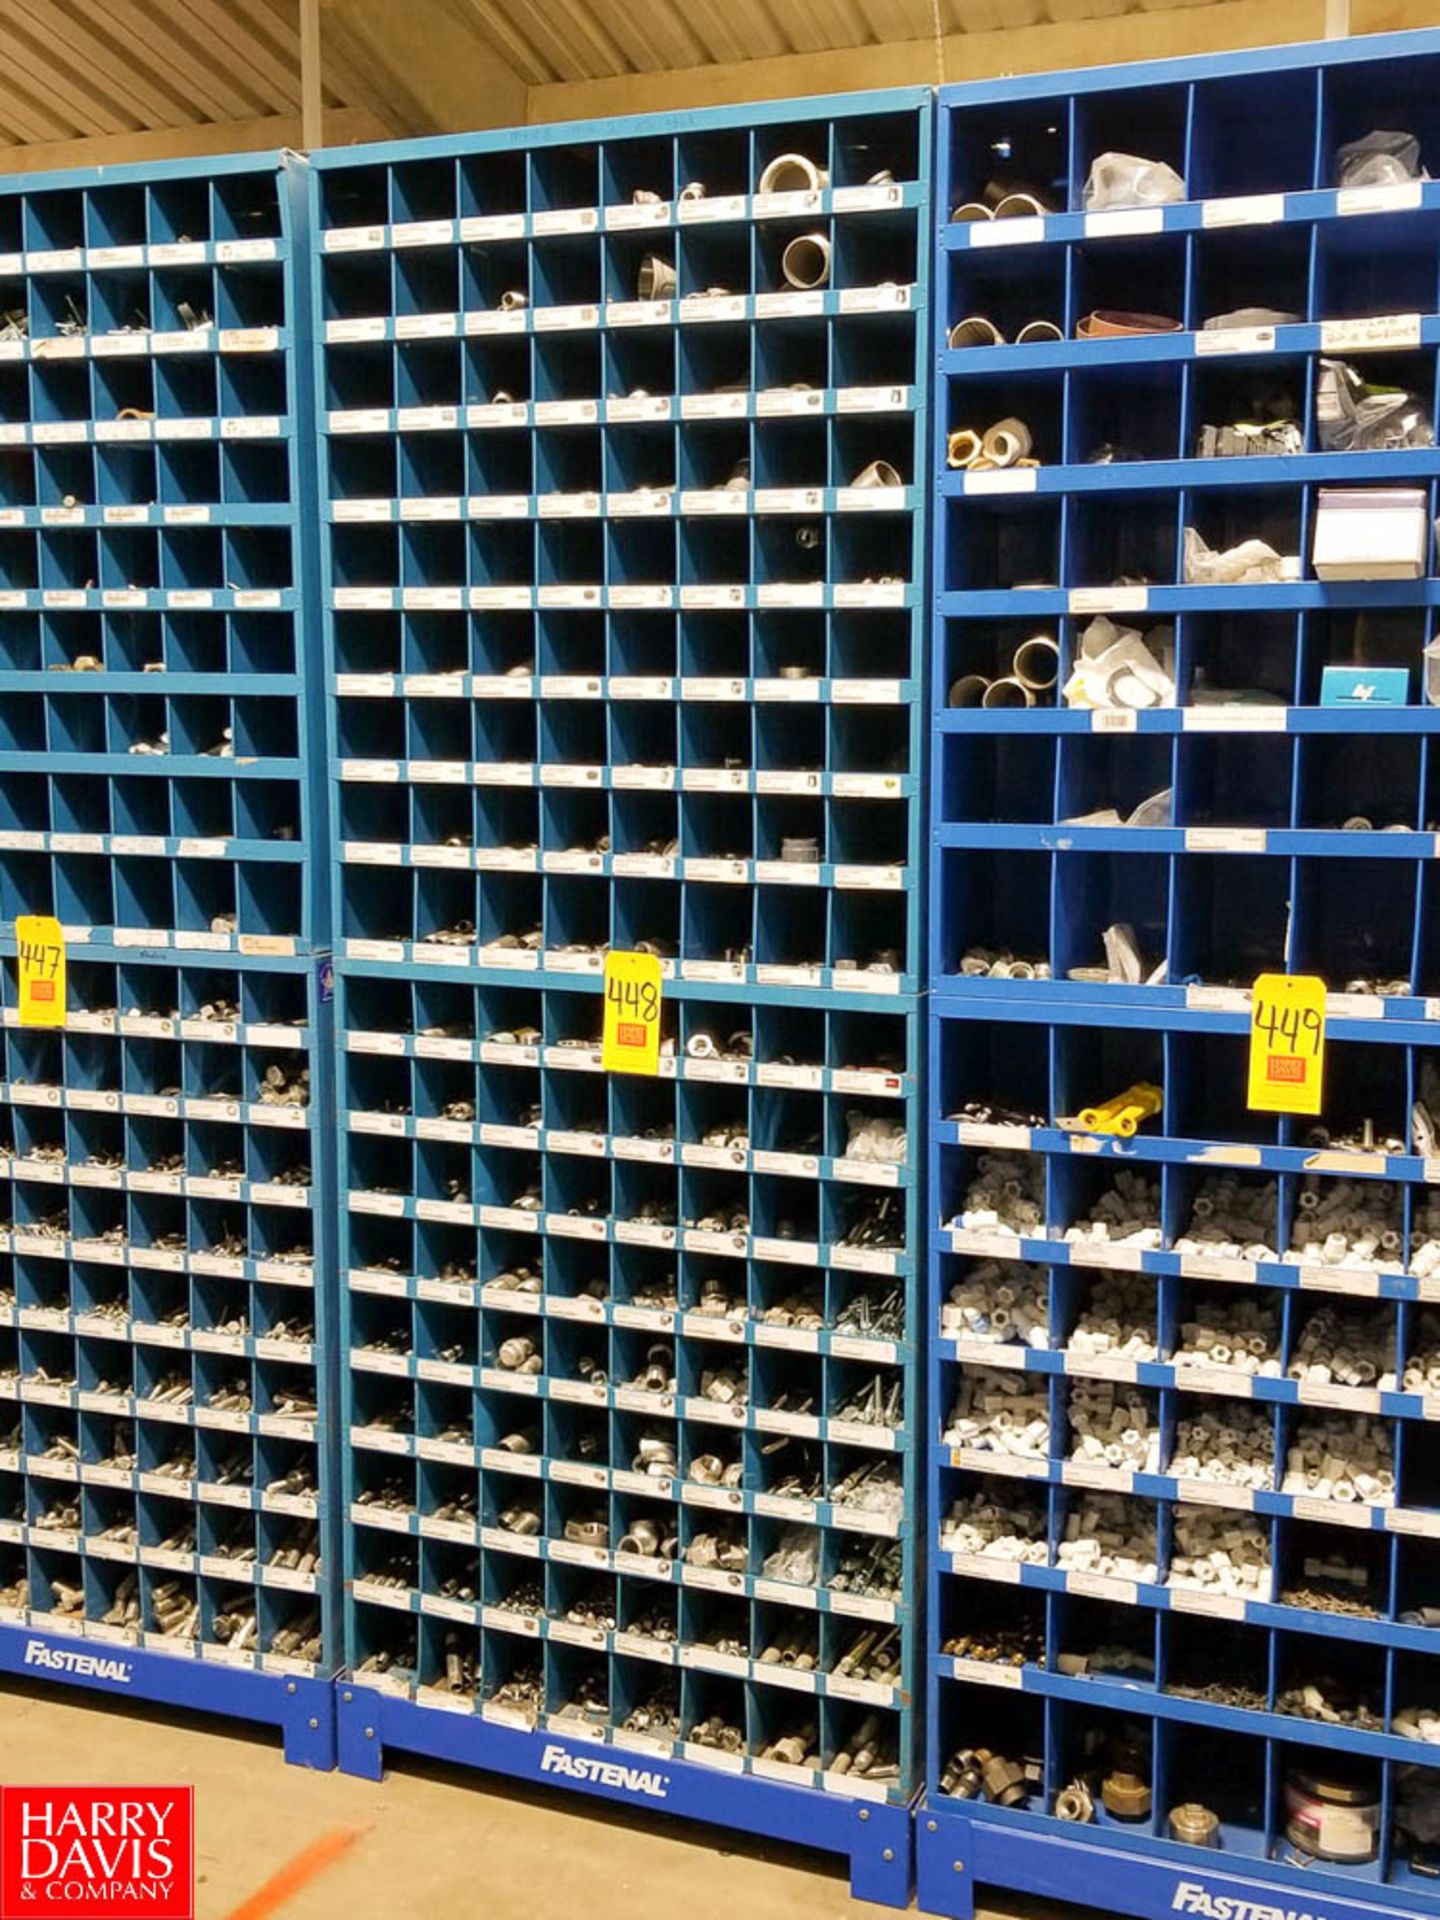 Fastenal 72-Compartment Bolt Bins with Contents of S/S Pipe Fittings - Rigging Fee: $200